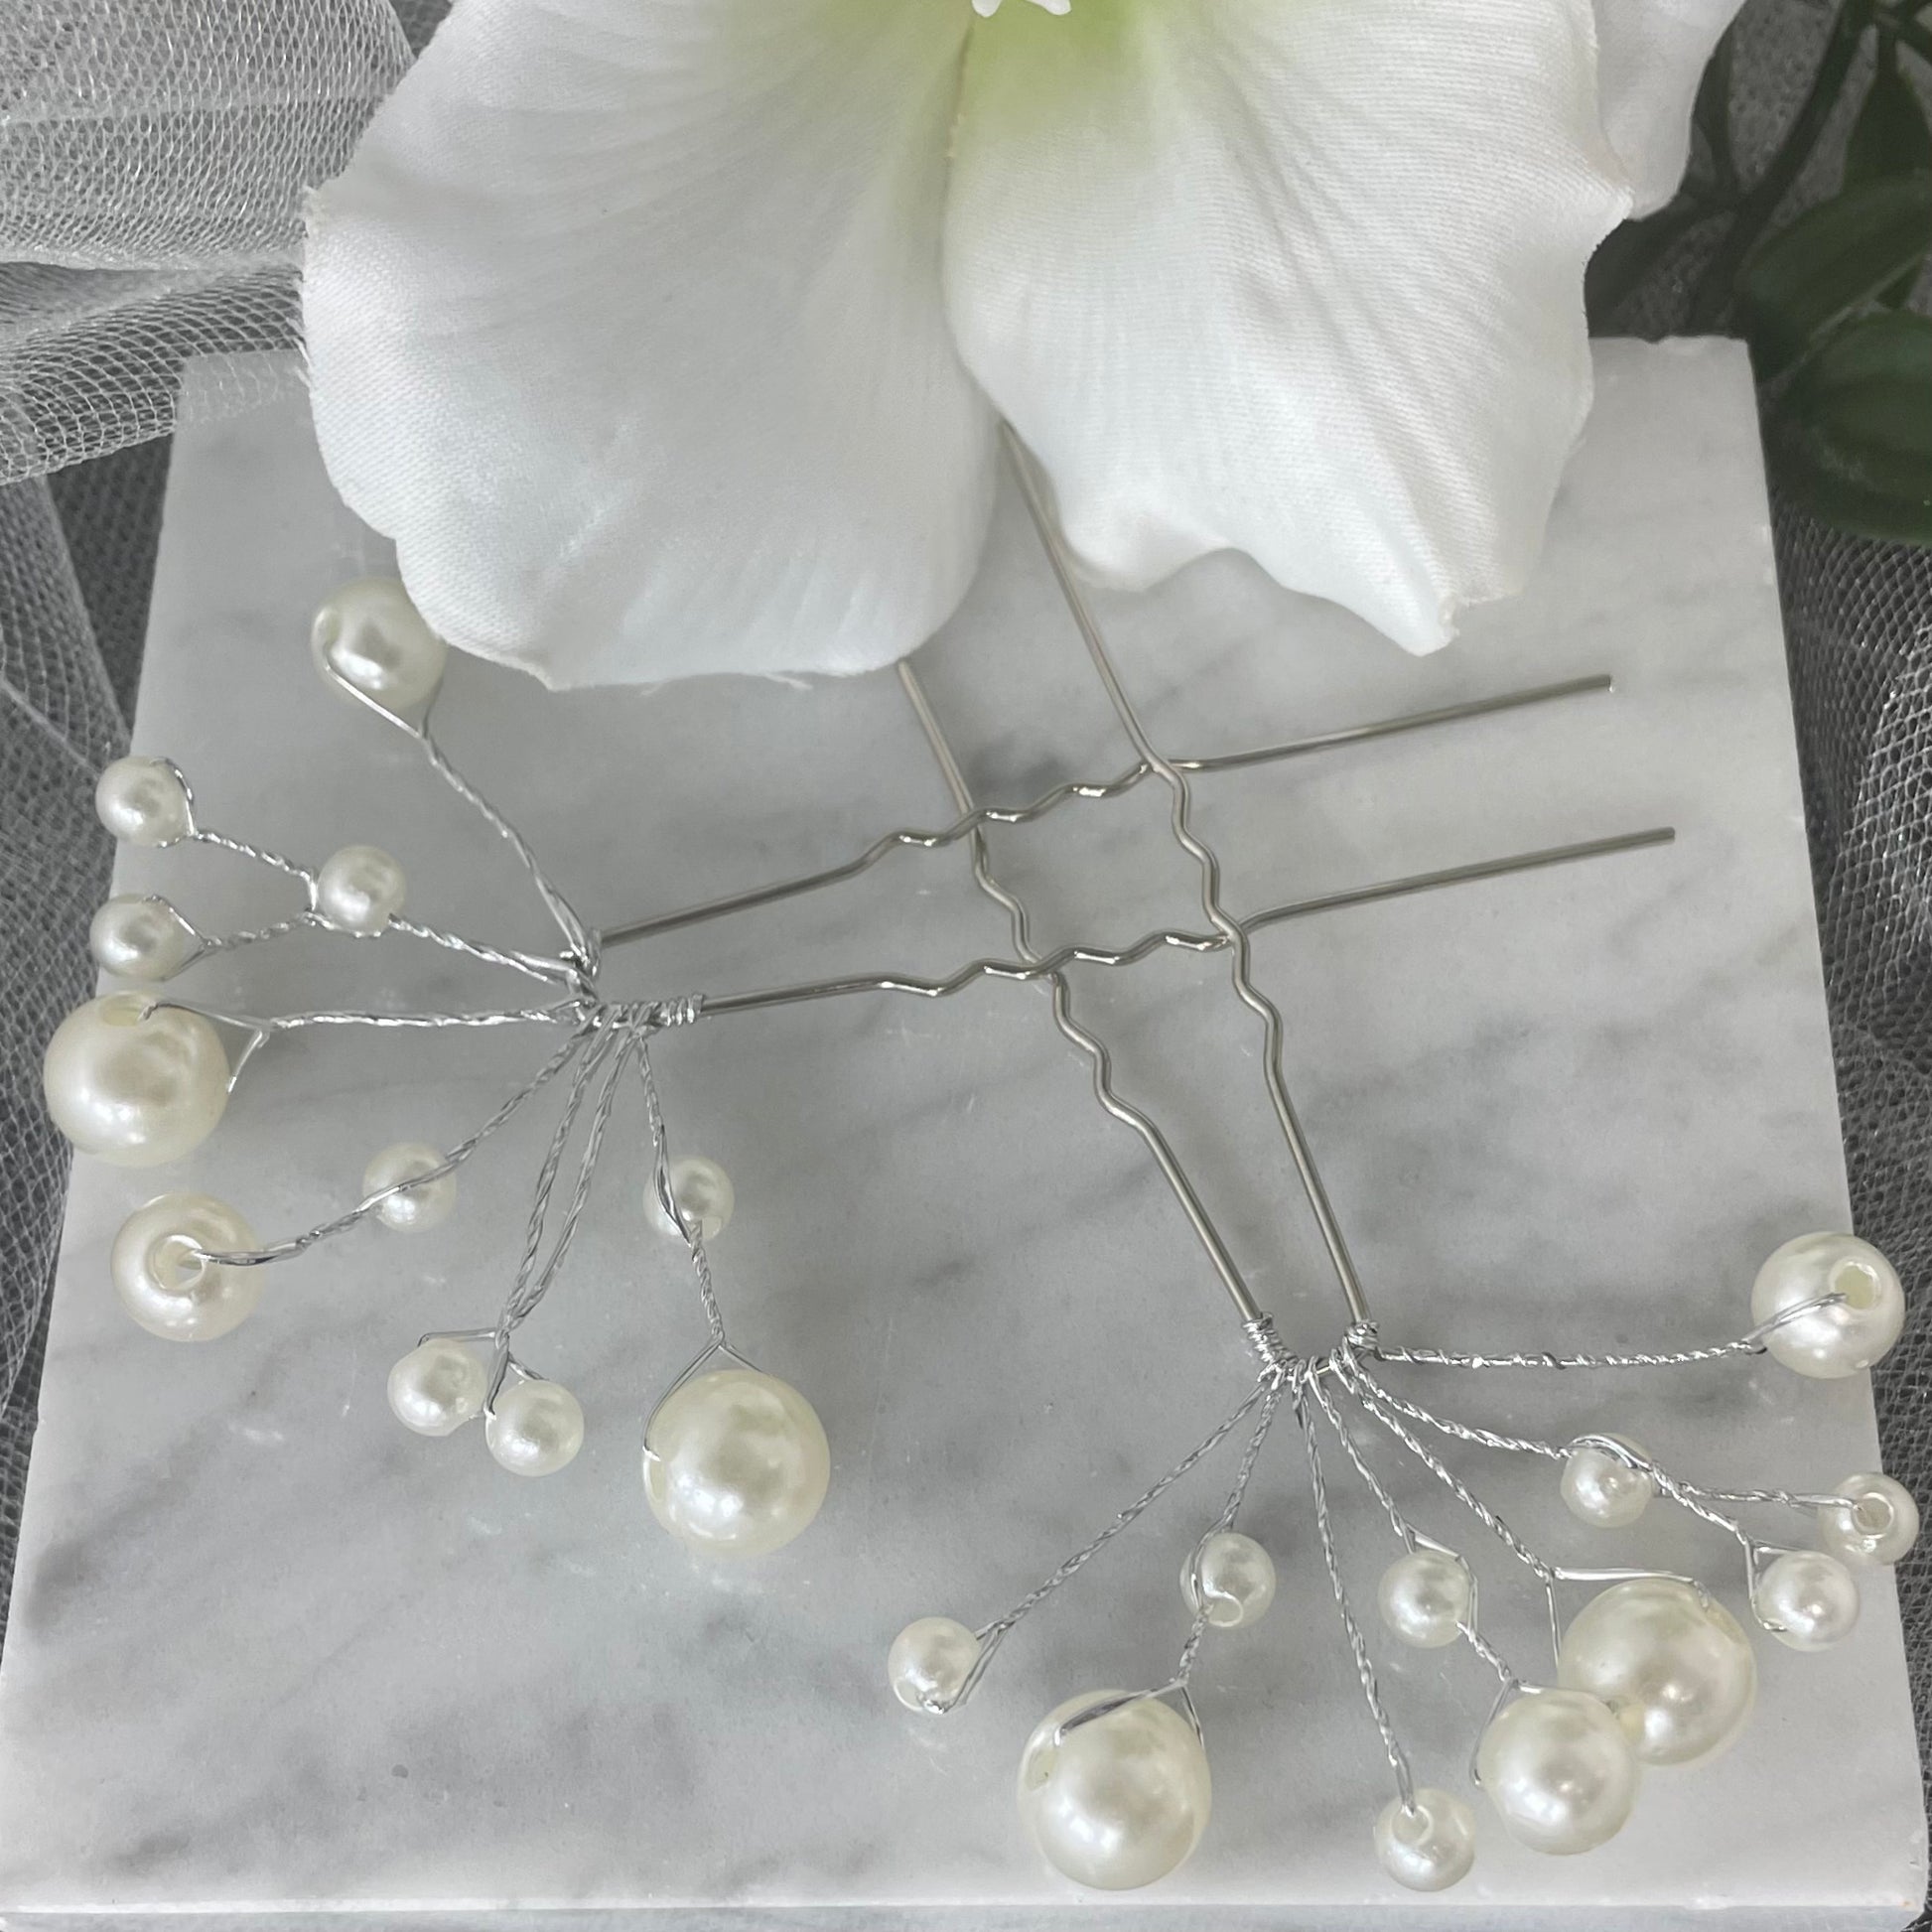 Delicate bridal hairpin adorned with four large and seven small pearls, perfect for adding a touch of classic elegance to any bridal or formal hairstyle.